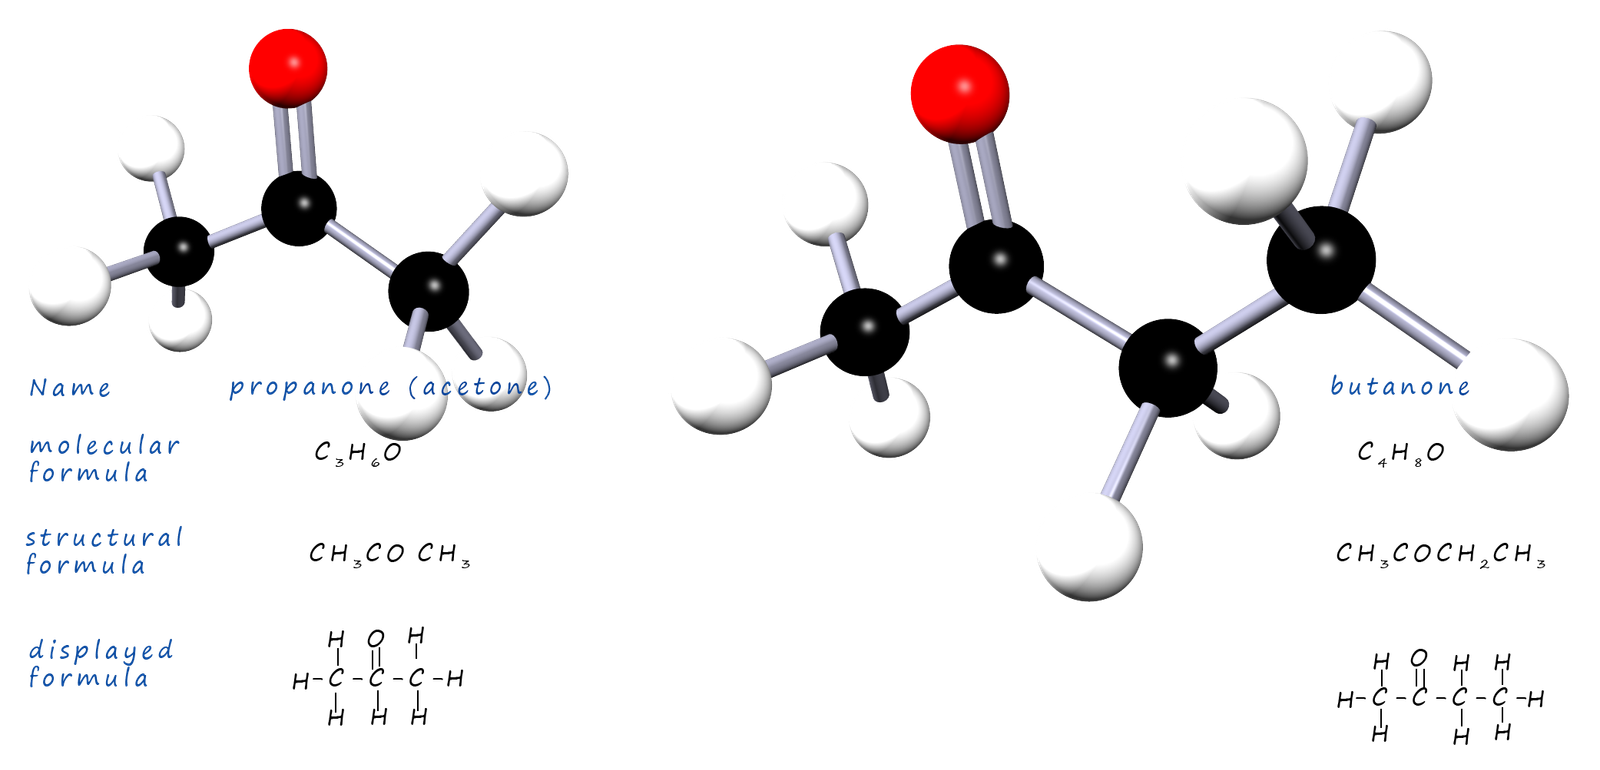 3d models of the first two ketones propanone and butanone.  The molecular and displayed formula are shown.